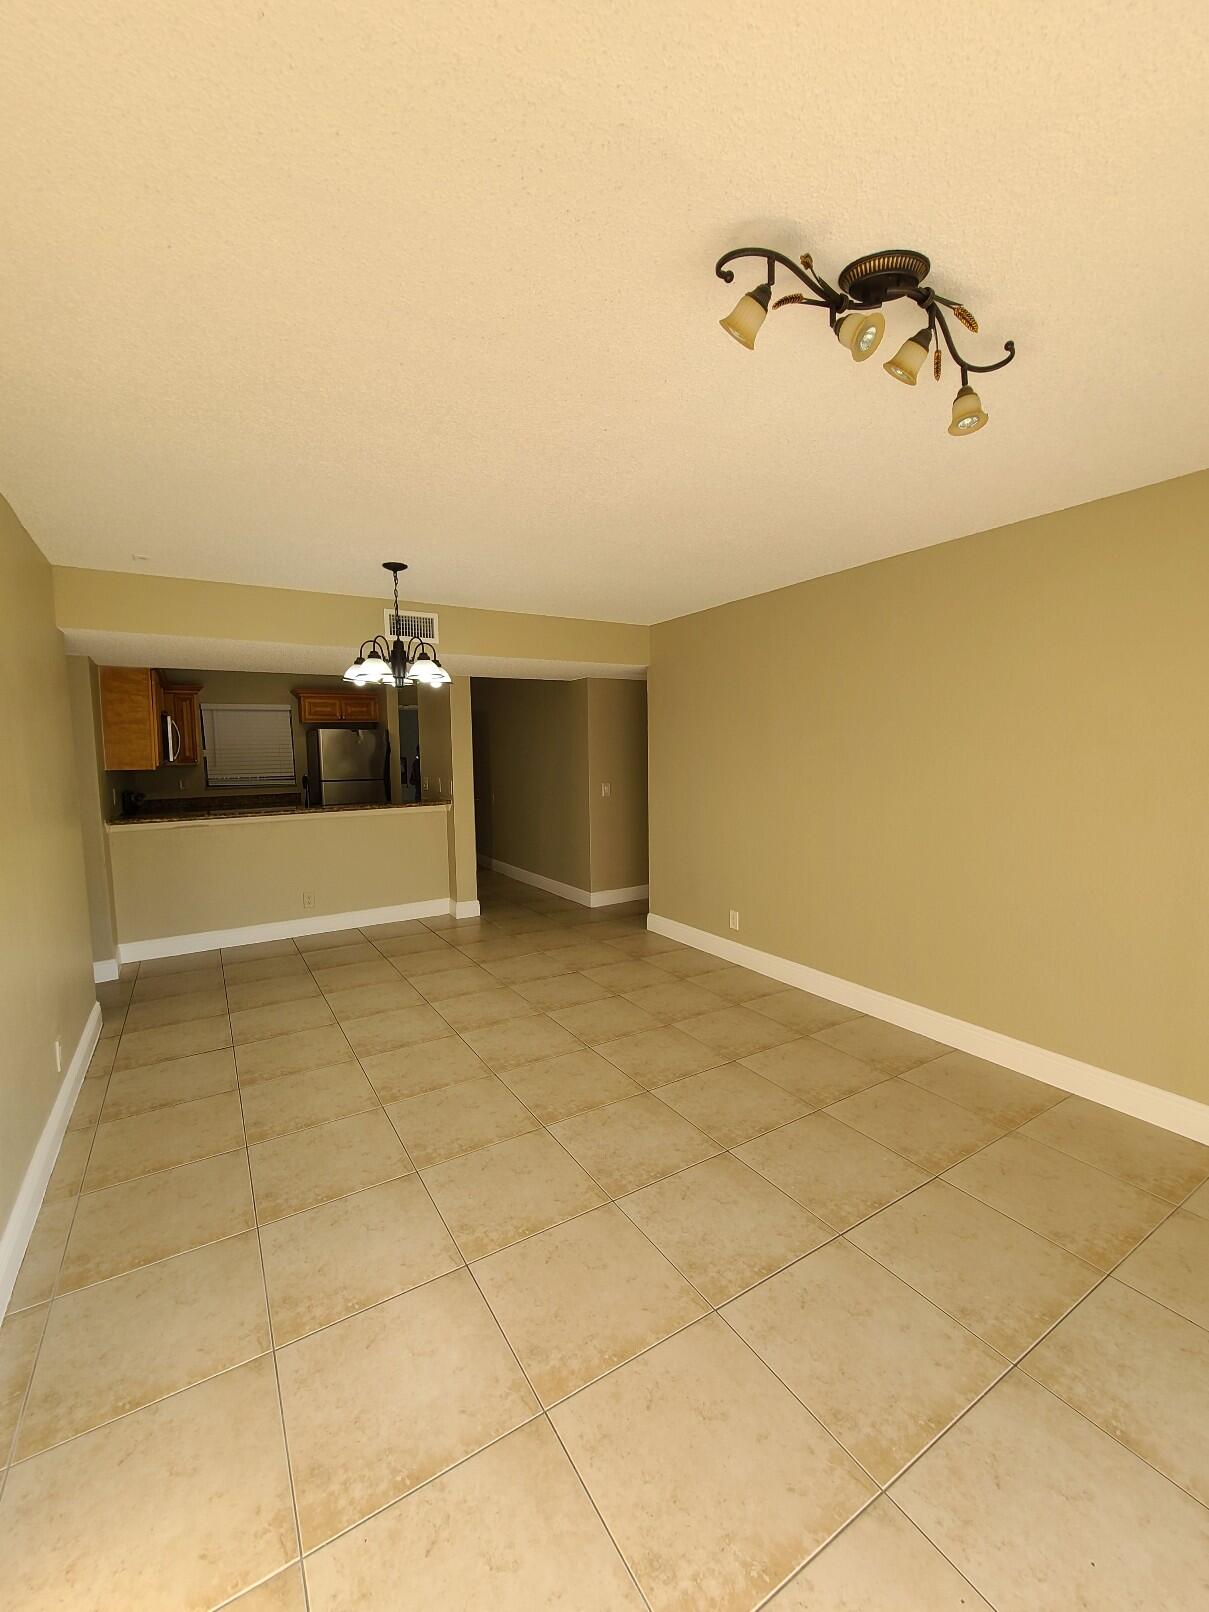 Property for Sale at 1461 Windorah Way C, West Palm Beach, Palm Beach County, Florida - Bedrooms: 3 
Bathrooms: 2  - $260,000